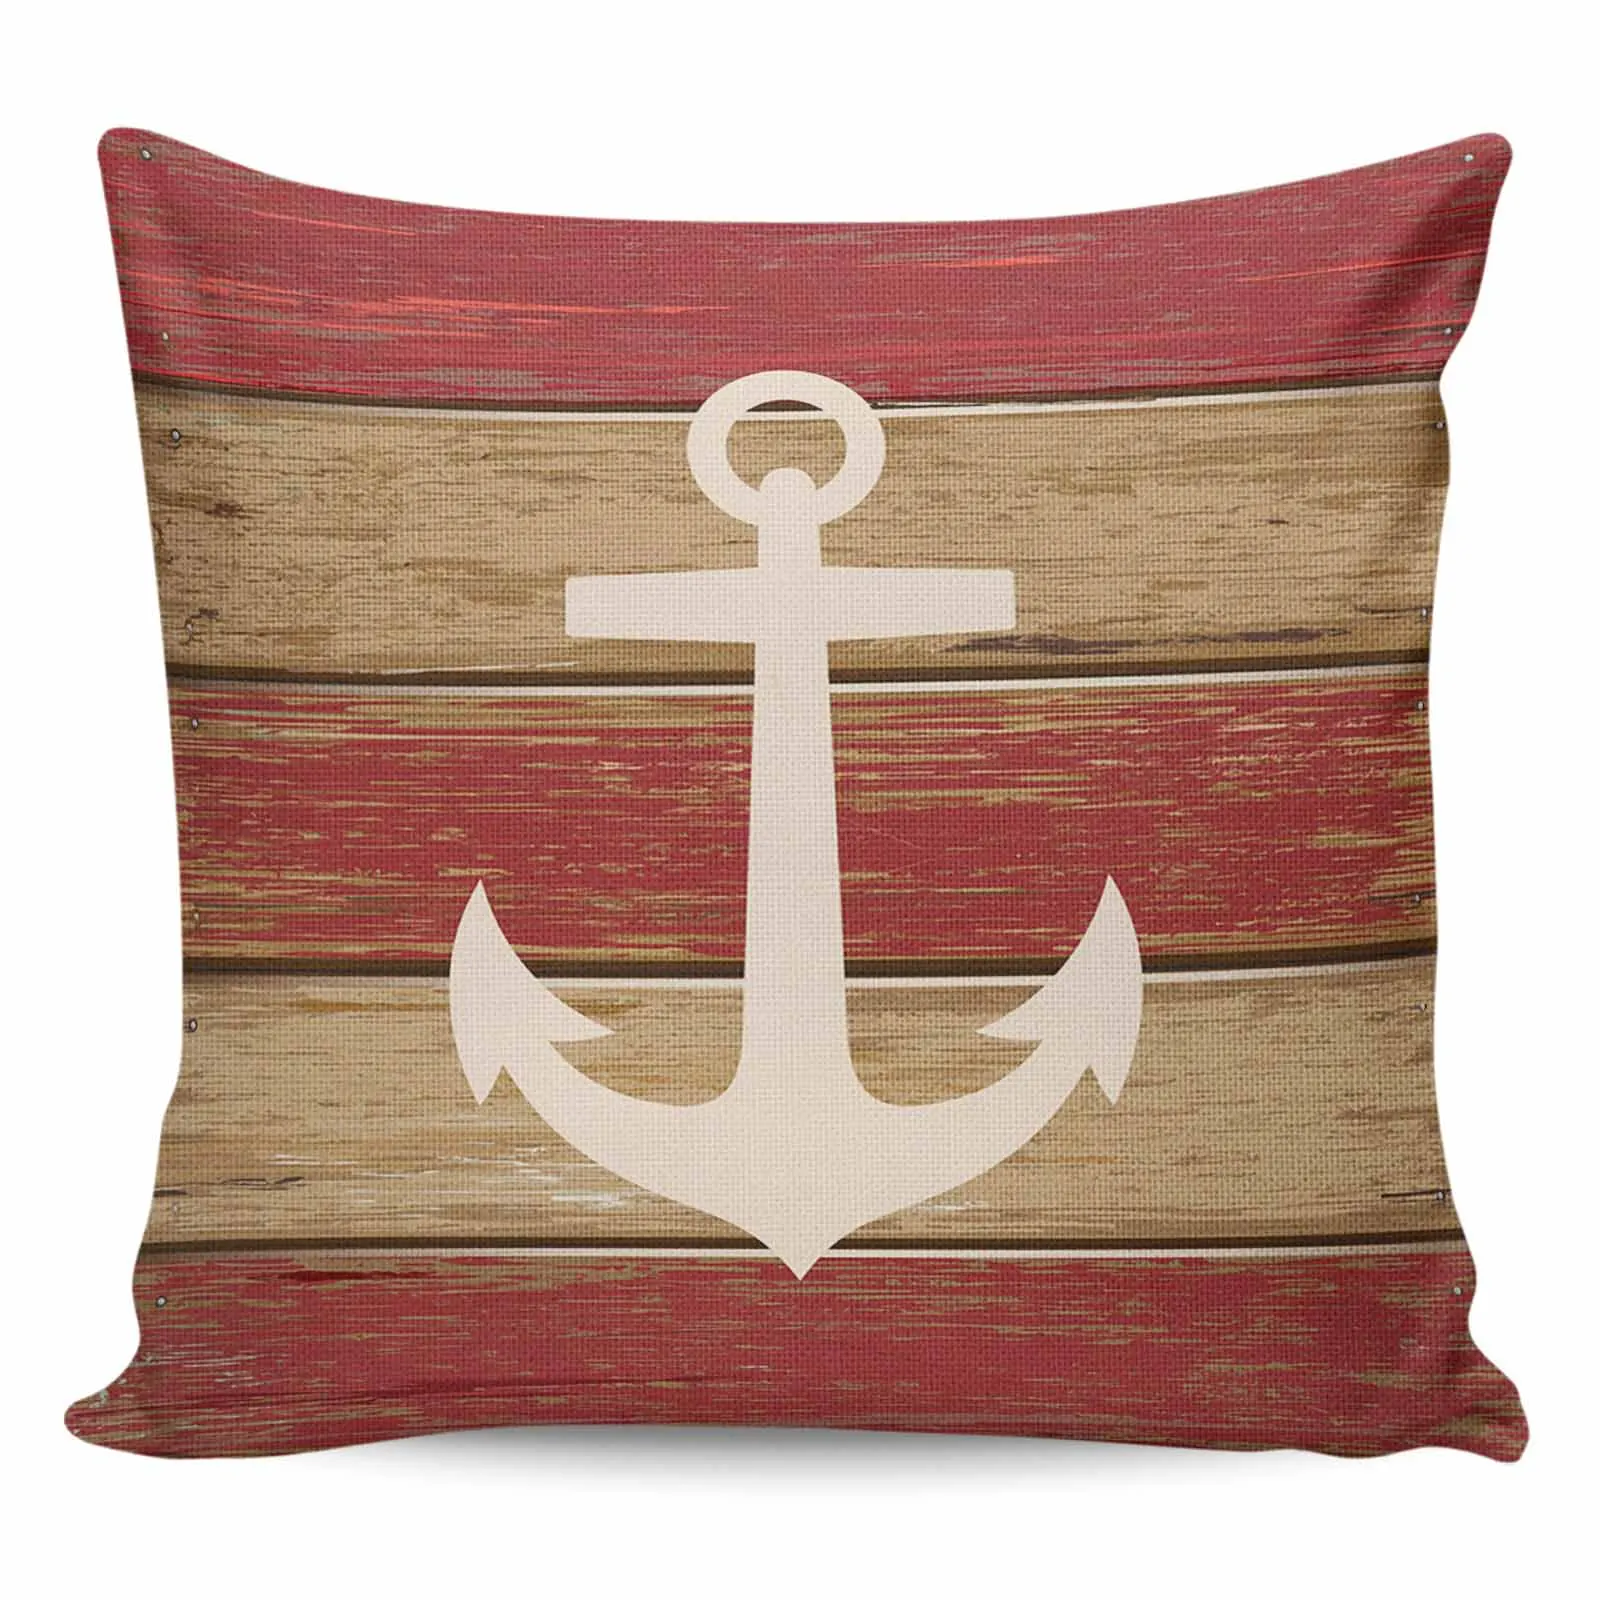 

2/4PCS Waterproof Pillow Cover Vintage Old Wooden Planks Texture Anchor Square Throw Pillowcase Home Decor Sofa Cushion Cover